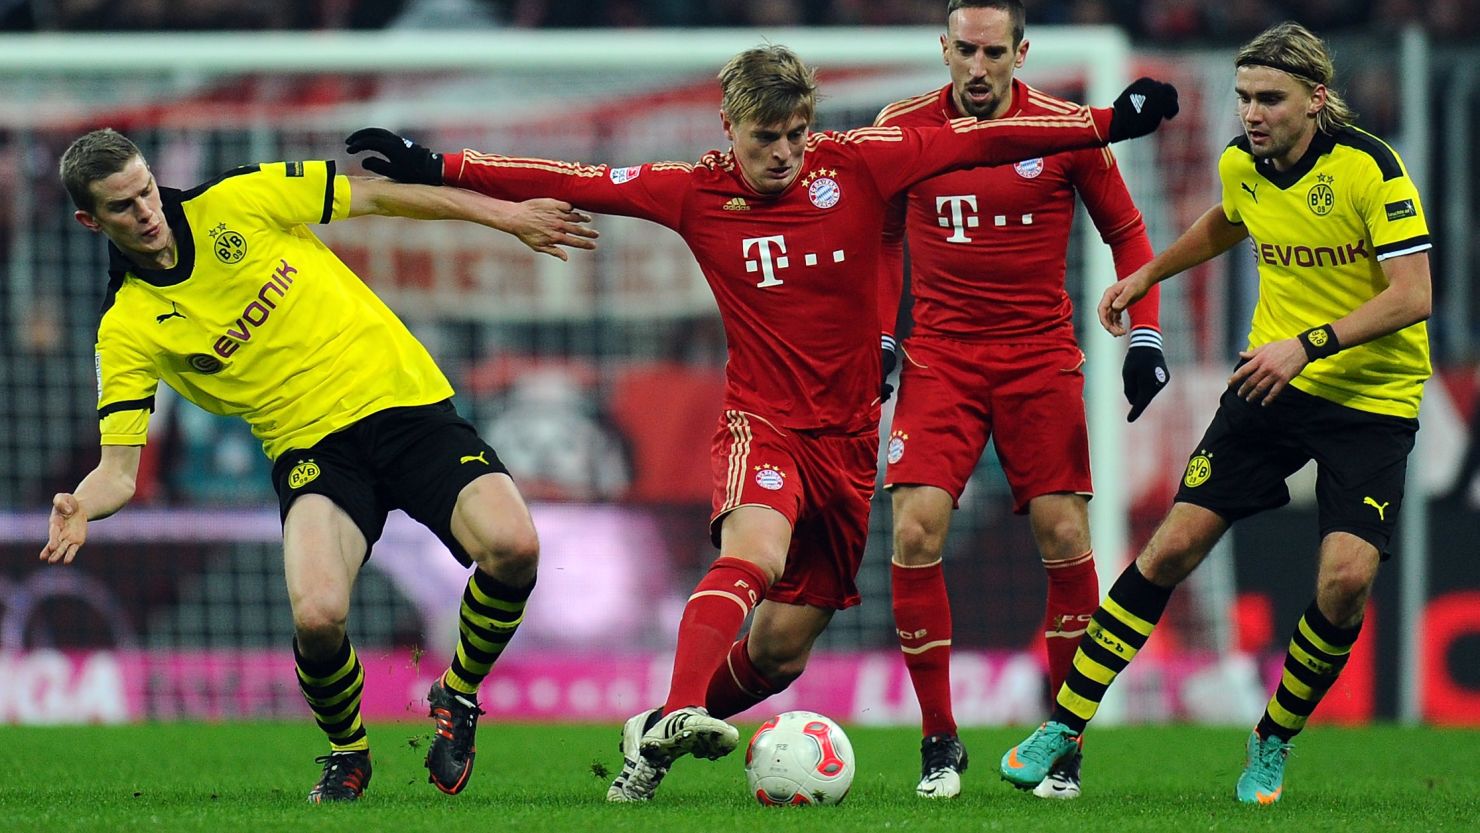 Bayern Munich's Toni Kroos fights his way through the Dortmund defense during the 1-1 draw at the Allianz Arena.